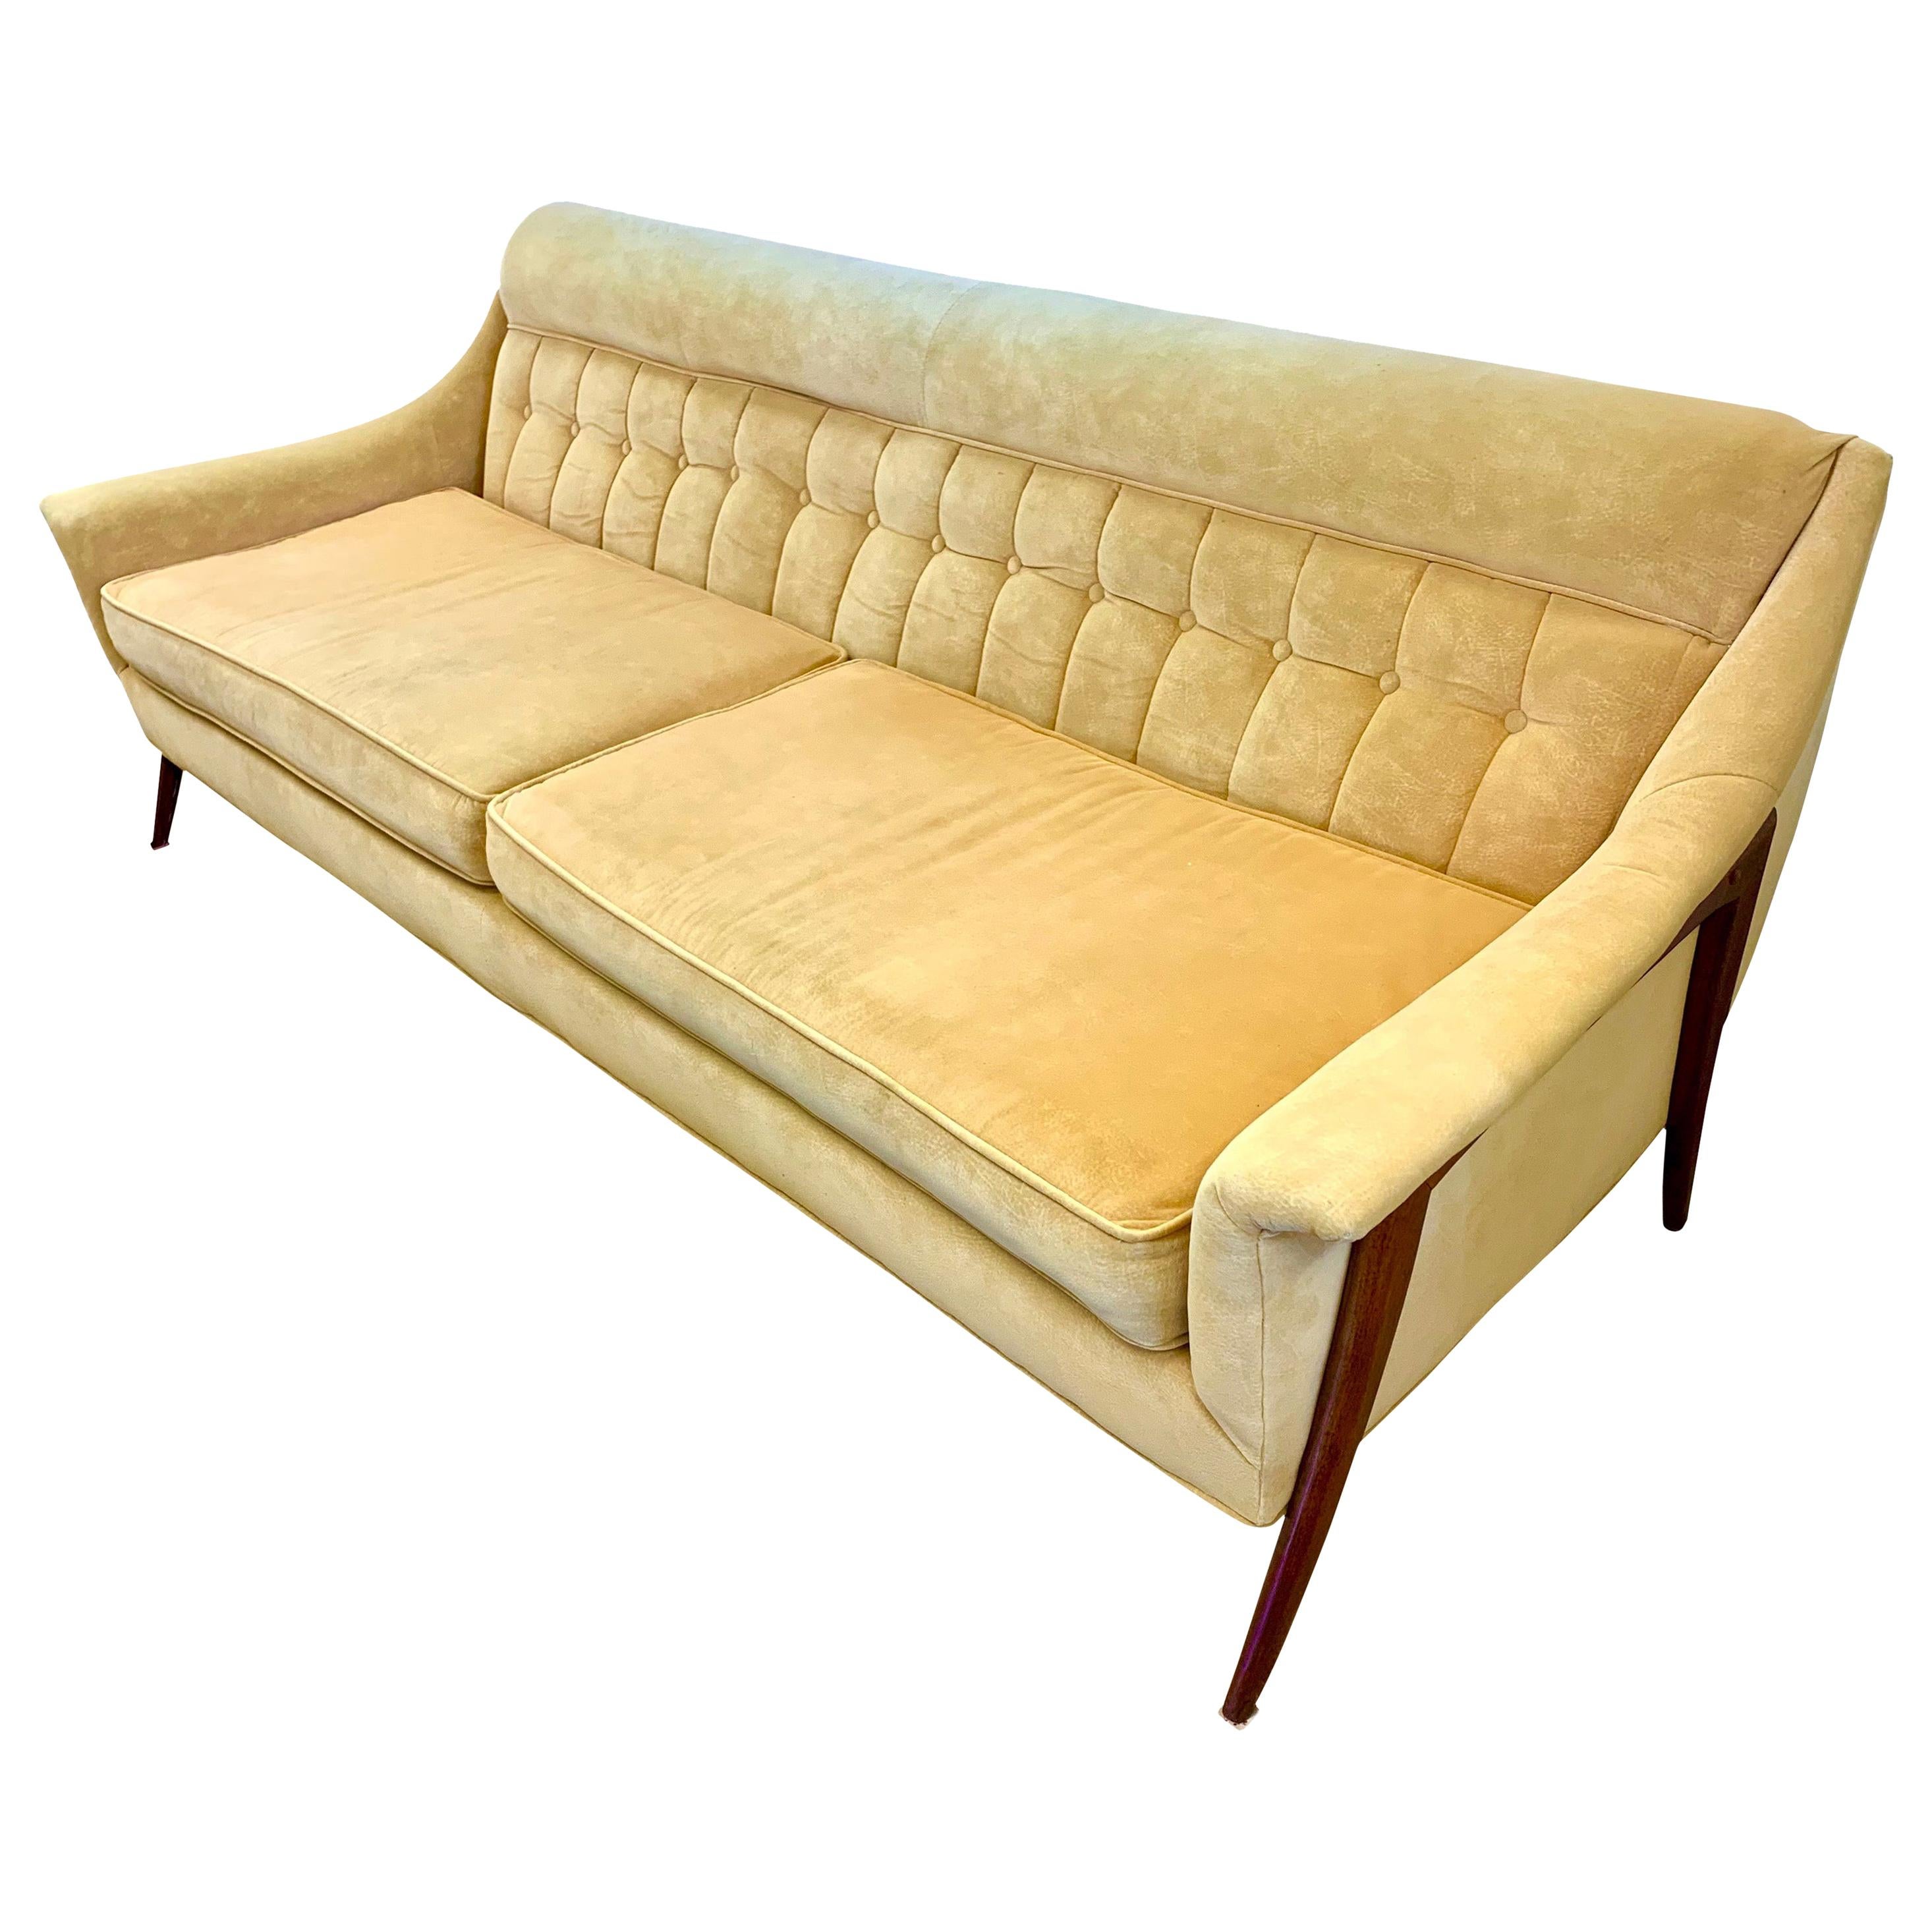 Midcentury Danish Modern Tufted Sculptural Sofa with Ultra Suede Fabric